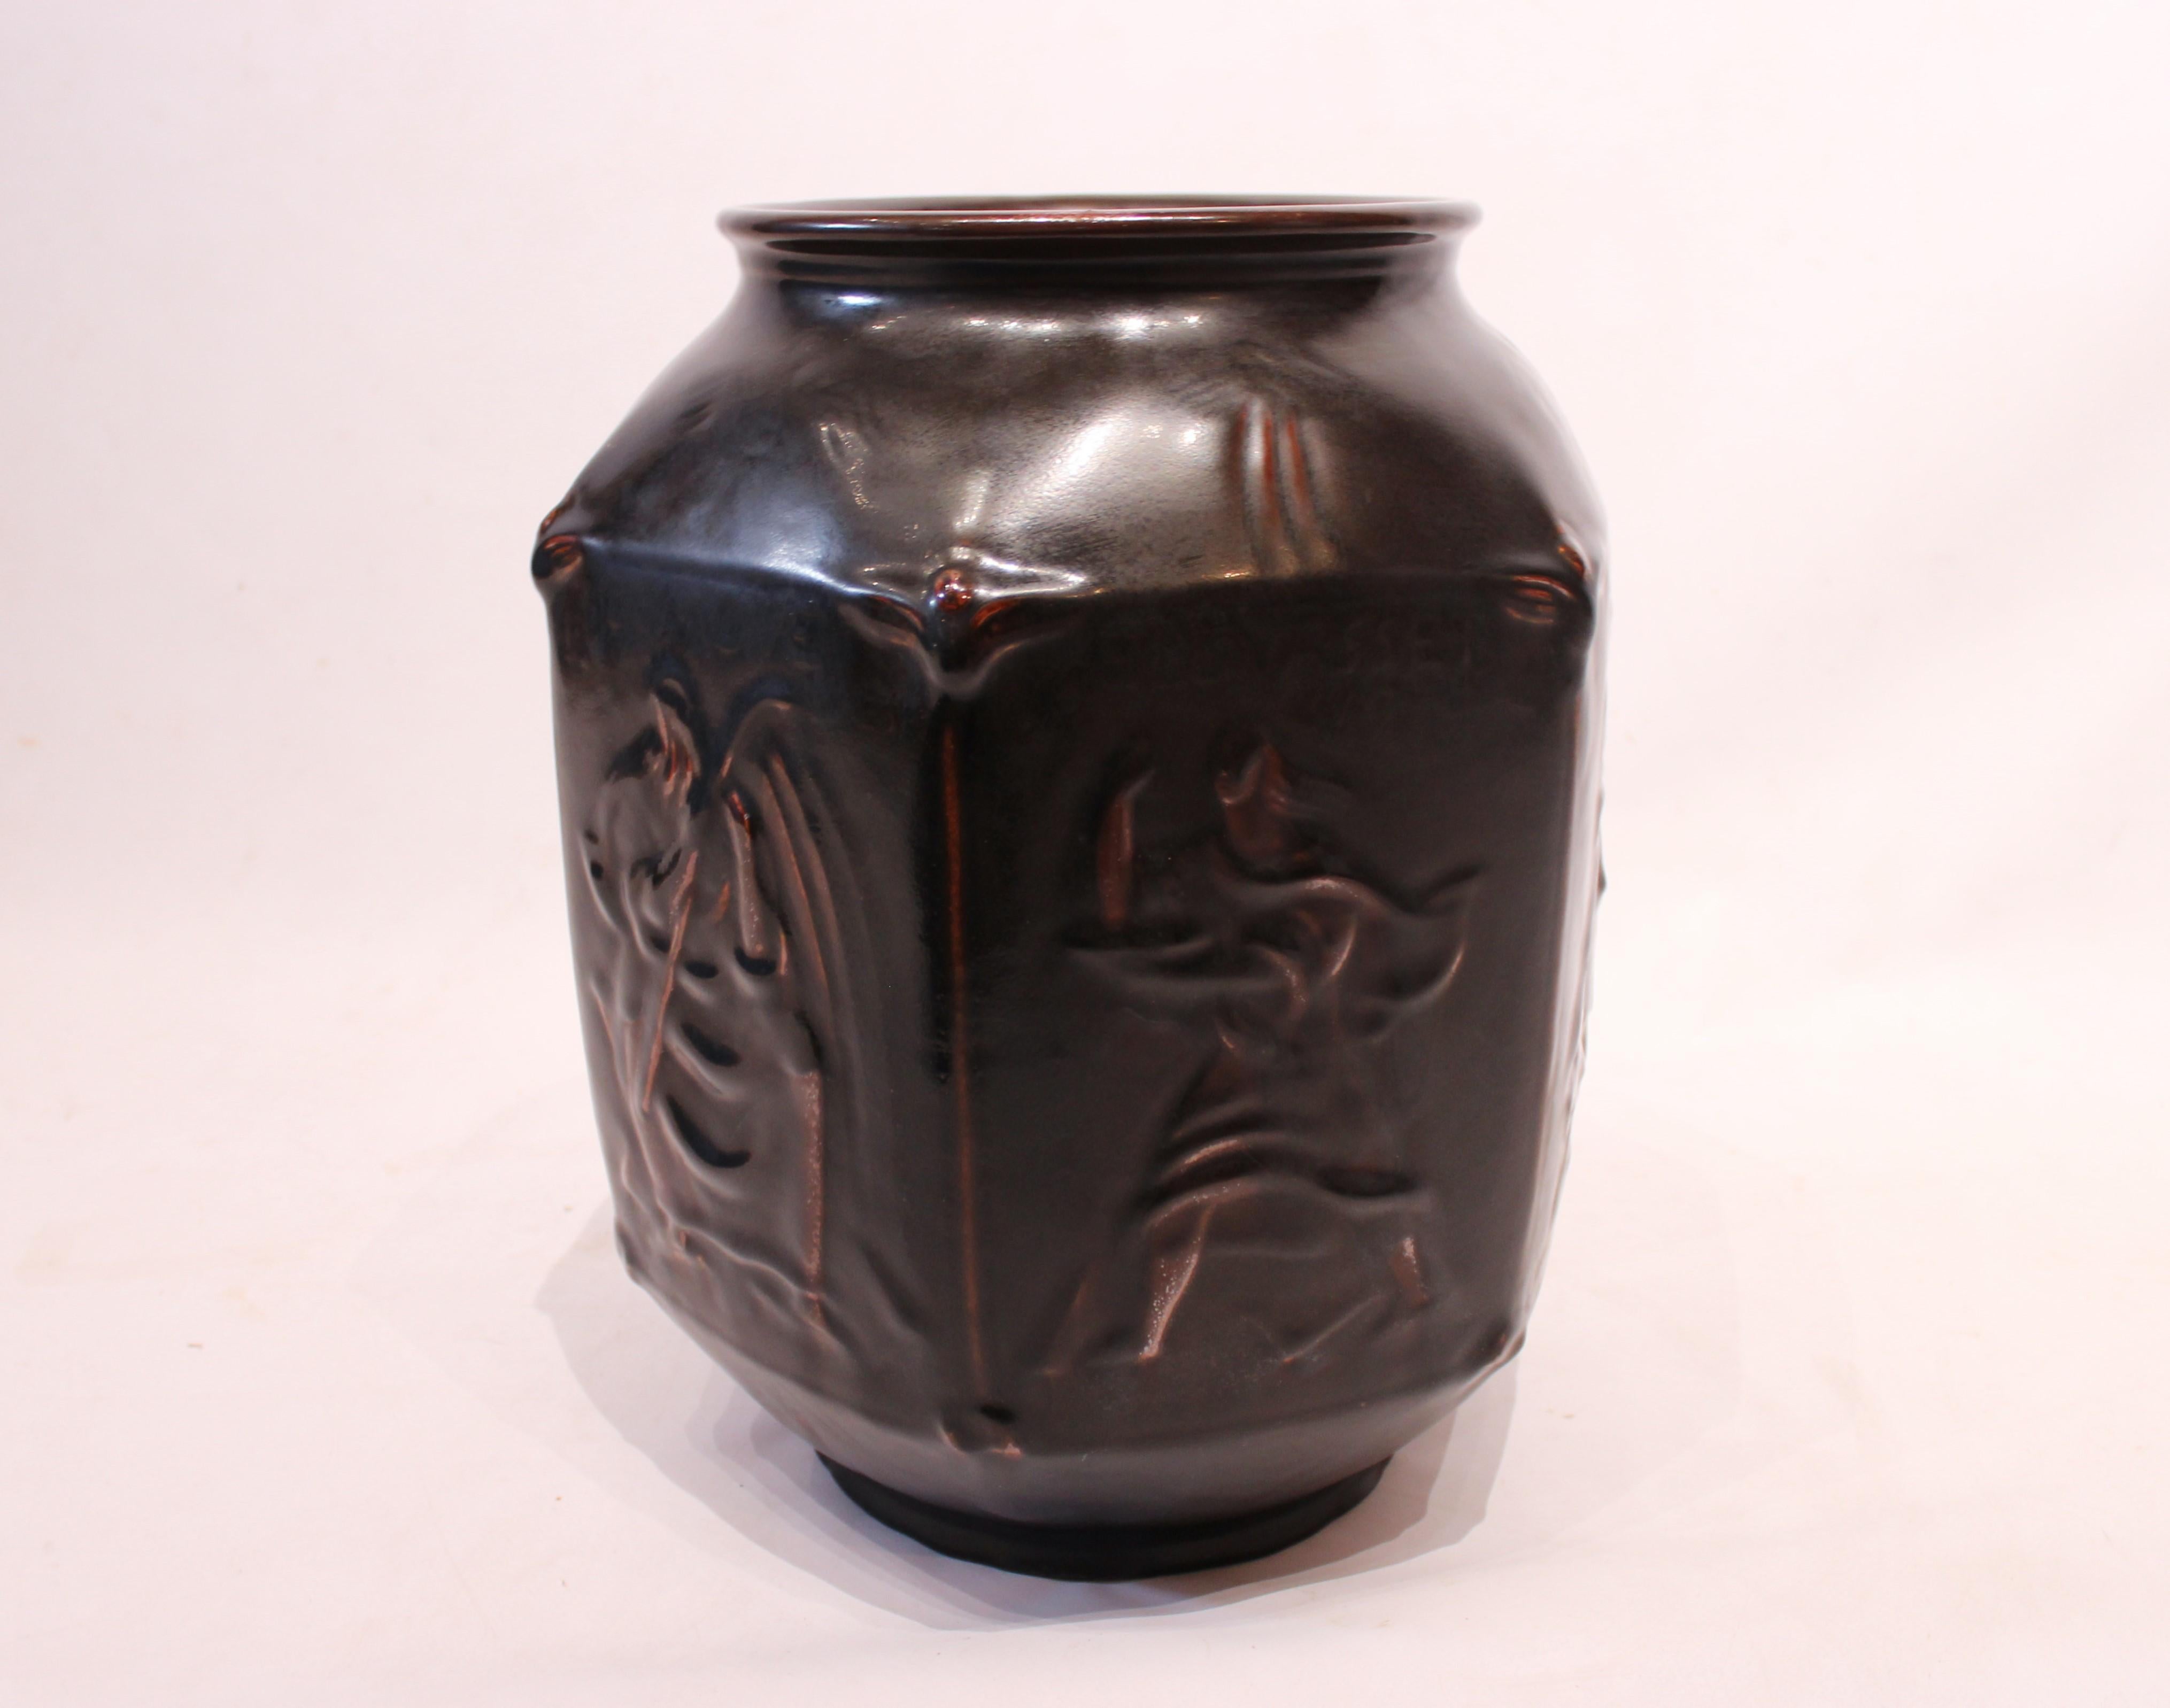 Royal Copenhagen stoneware floor vase with a dark glaze decorated with motifs signed by Jais Nielsen, 1885-1961, and numbered 2222. The vase is in great vintage condition from around the 1940s and works perfectly as a decorative piece in any home.